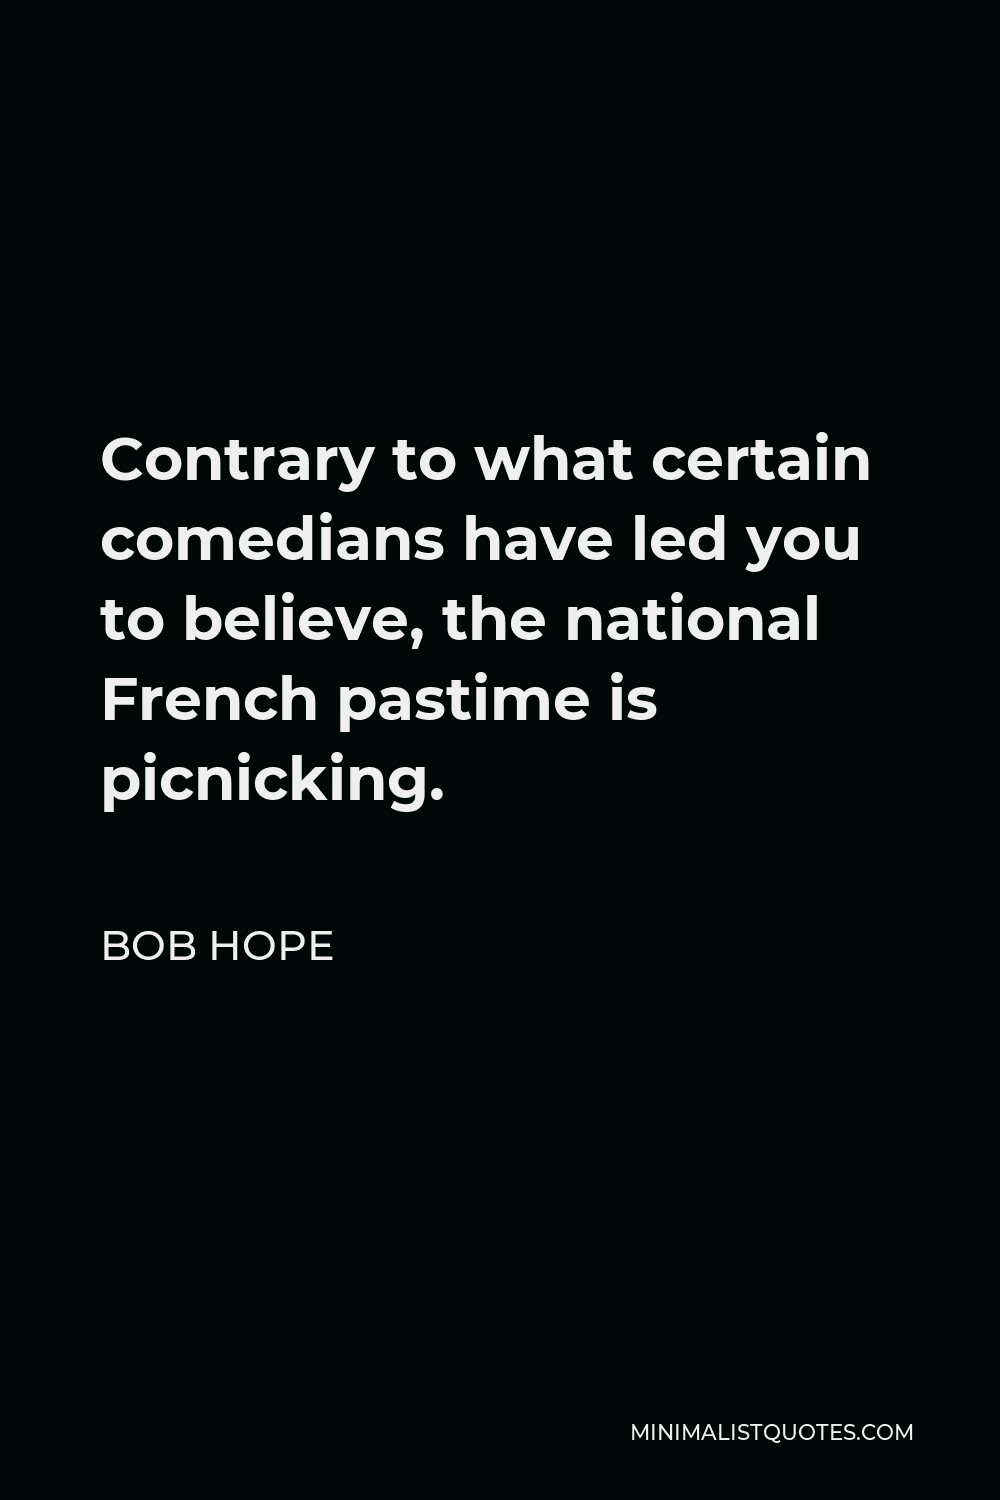 Bob Hope Quote - Contrary to what certain comedians have led you to believe, the national French pastime is picnicking.